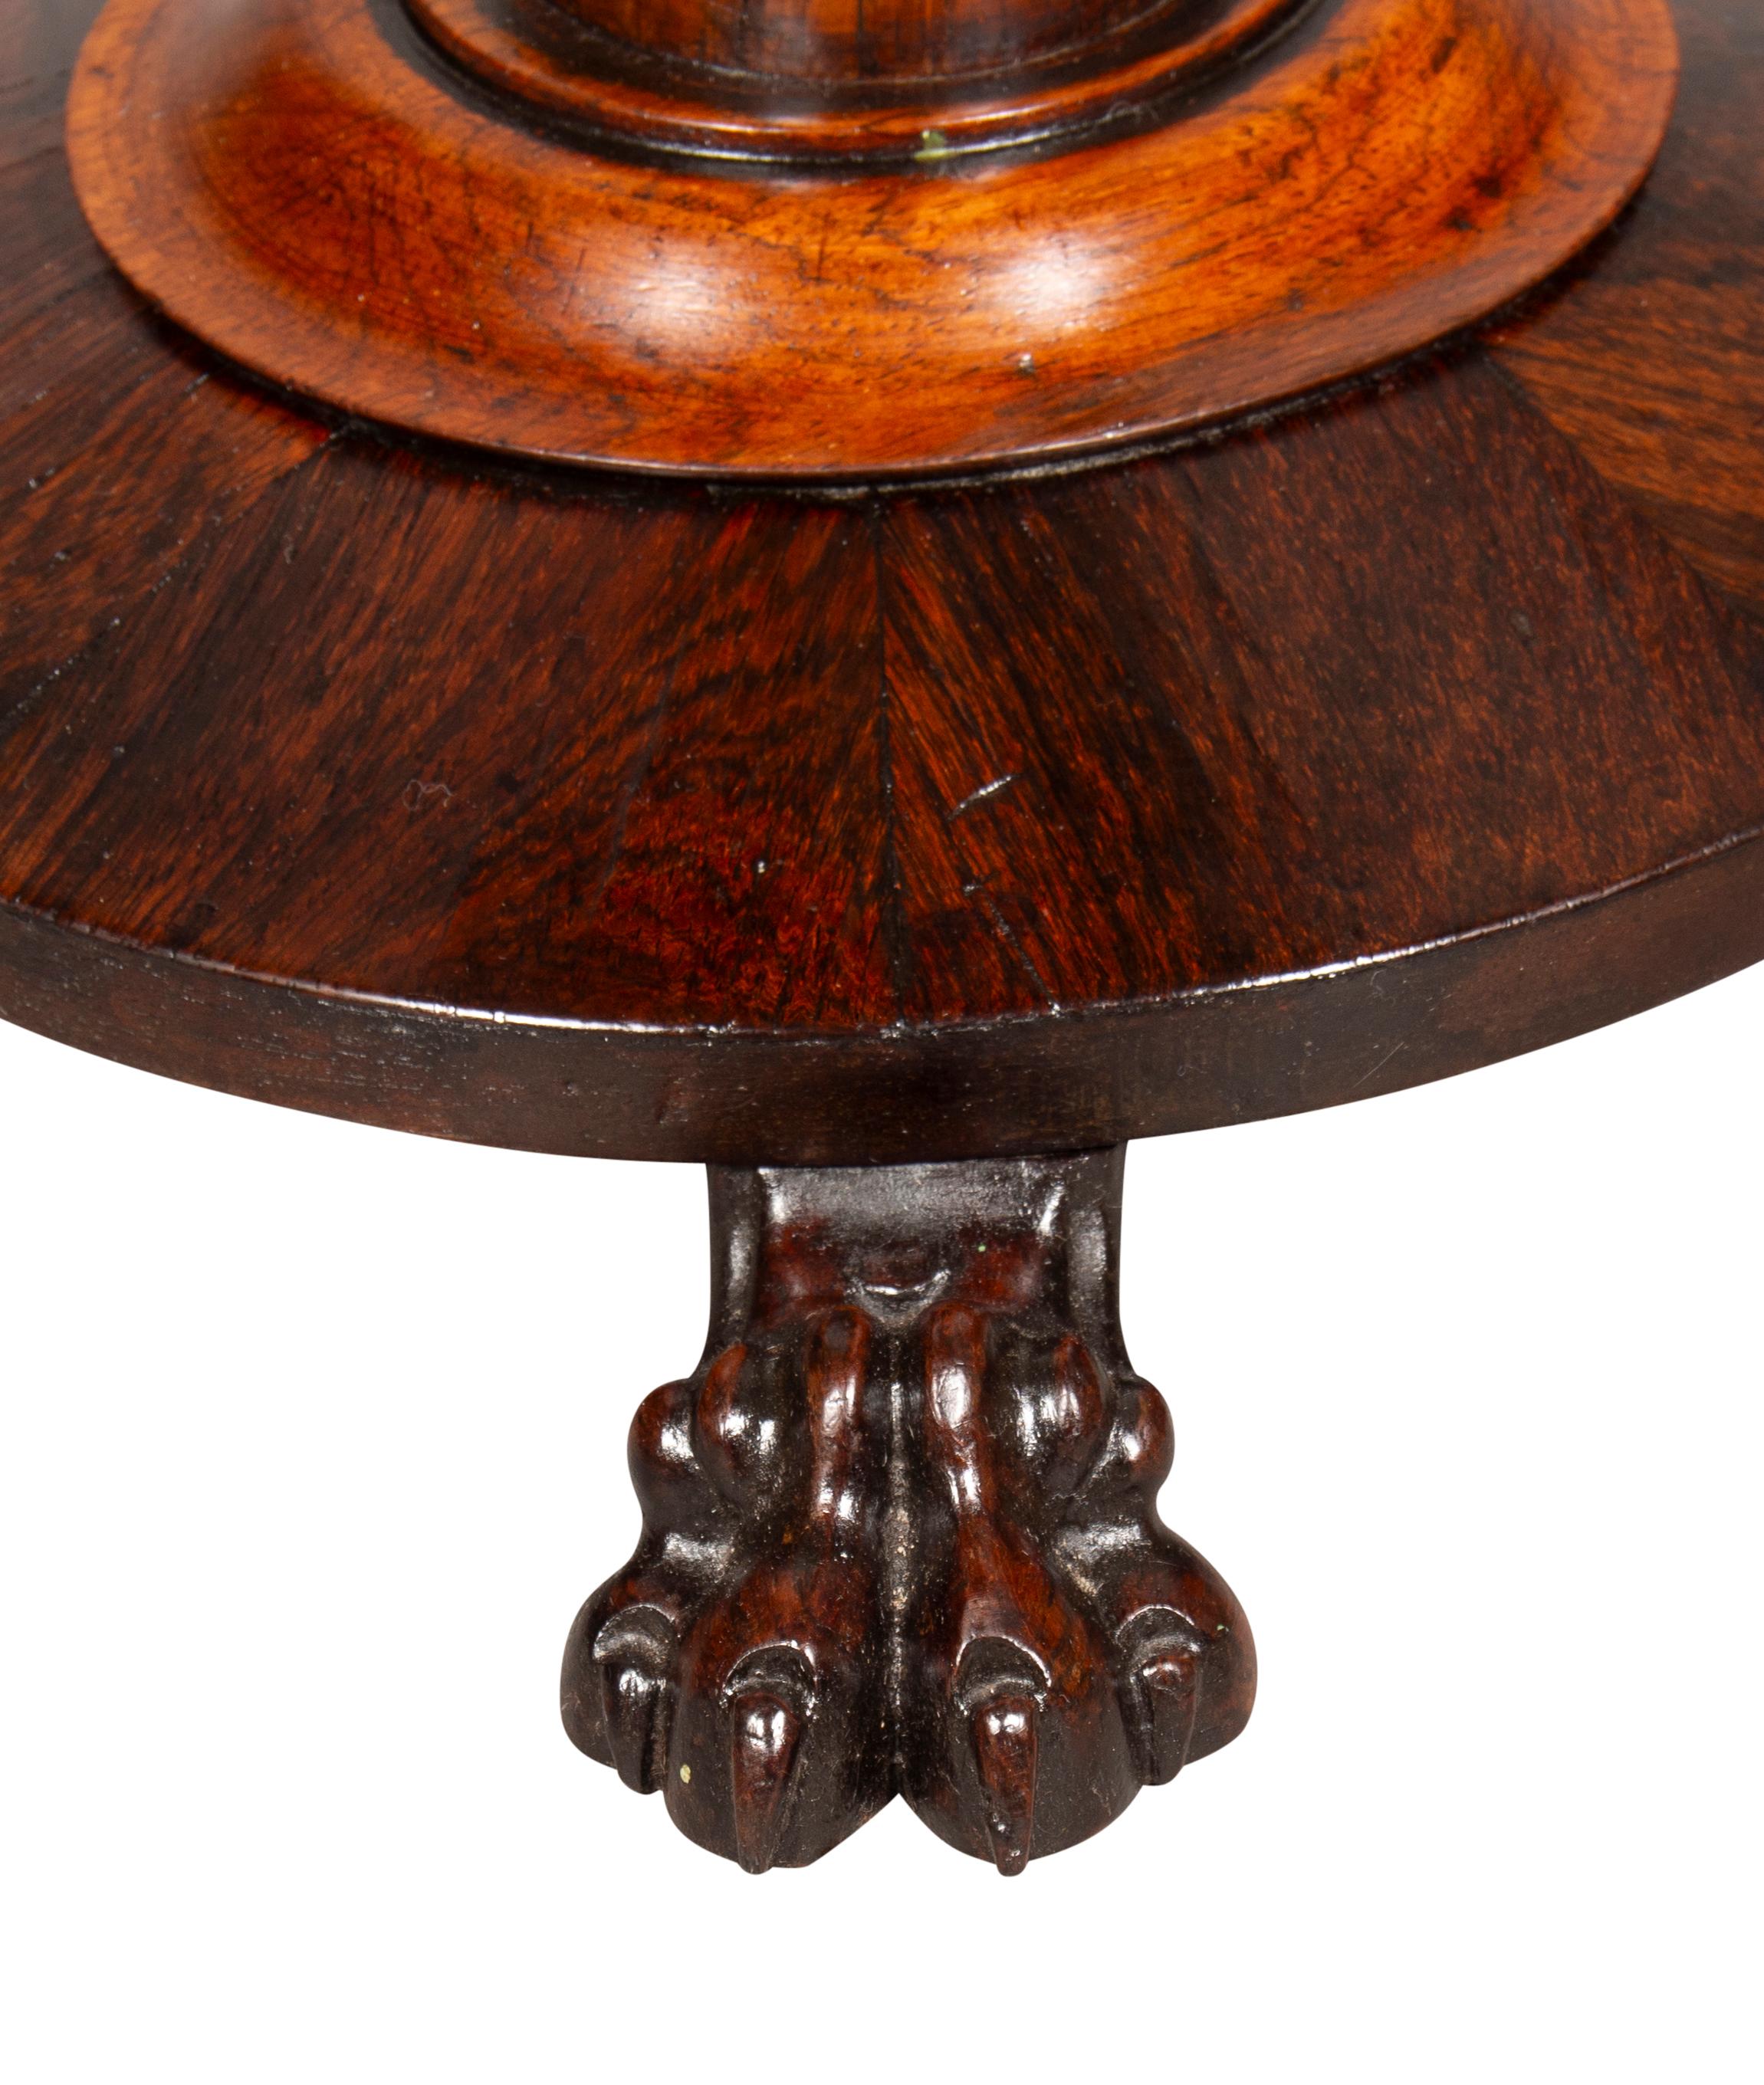 Mid-19th Century William IV Rosewood Candle Stand For Sale